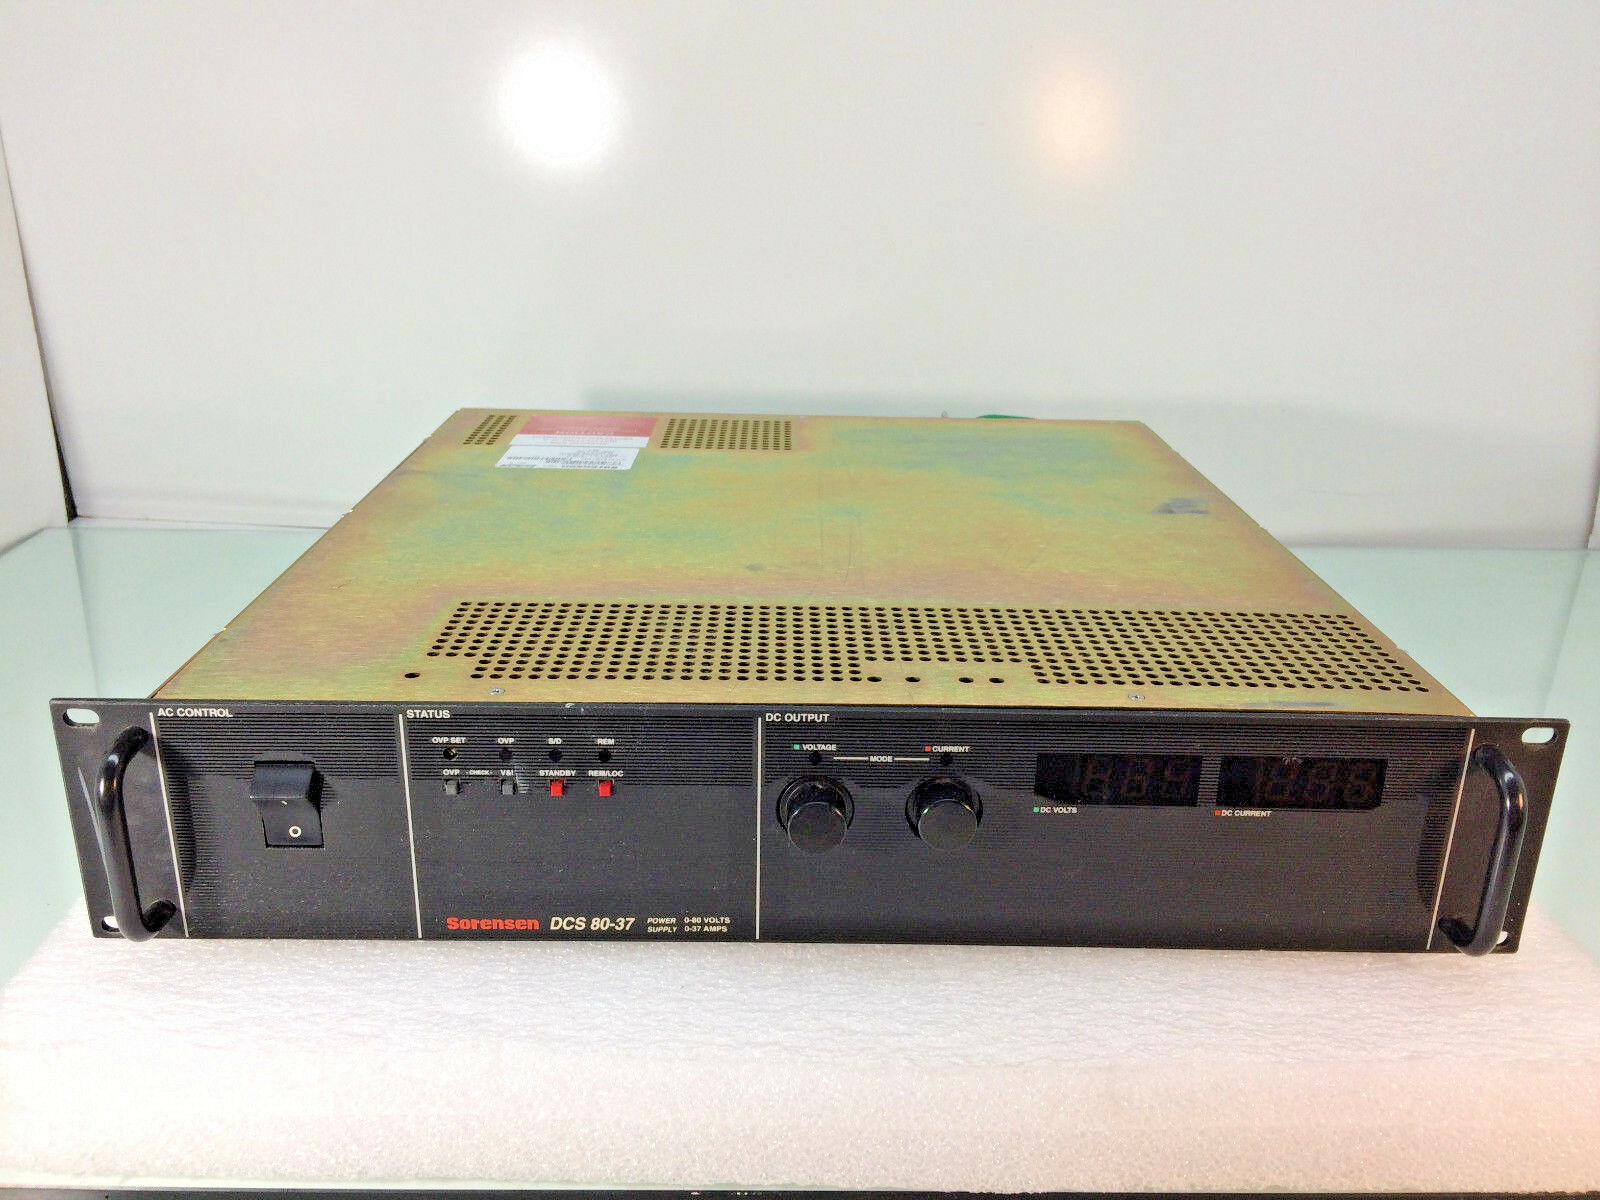 sorensen-dcs-80-37-dc-programmable-switching-power-supply-3kw-80v-37a-used-equipment-0.jpg